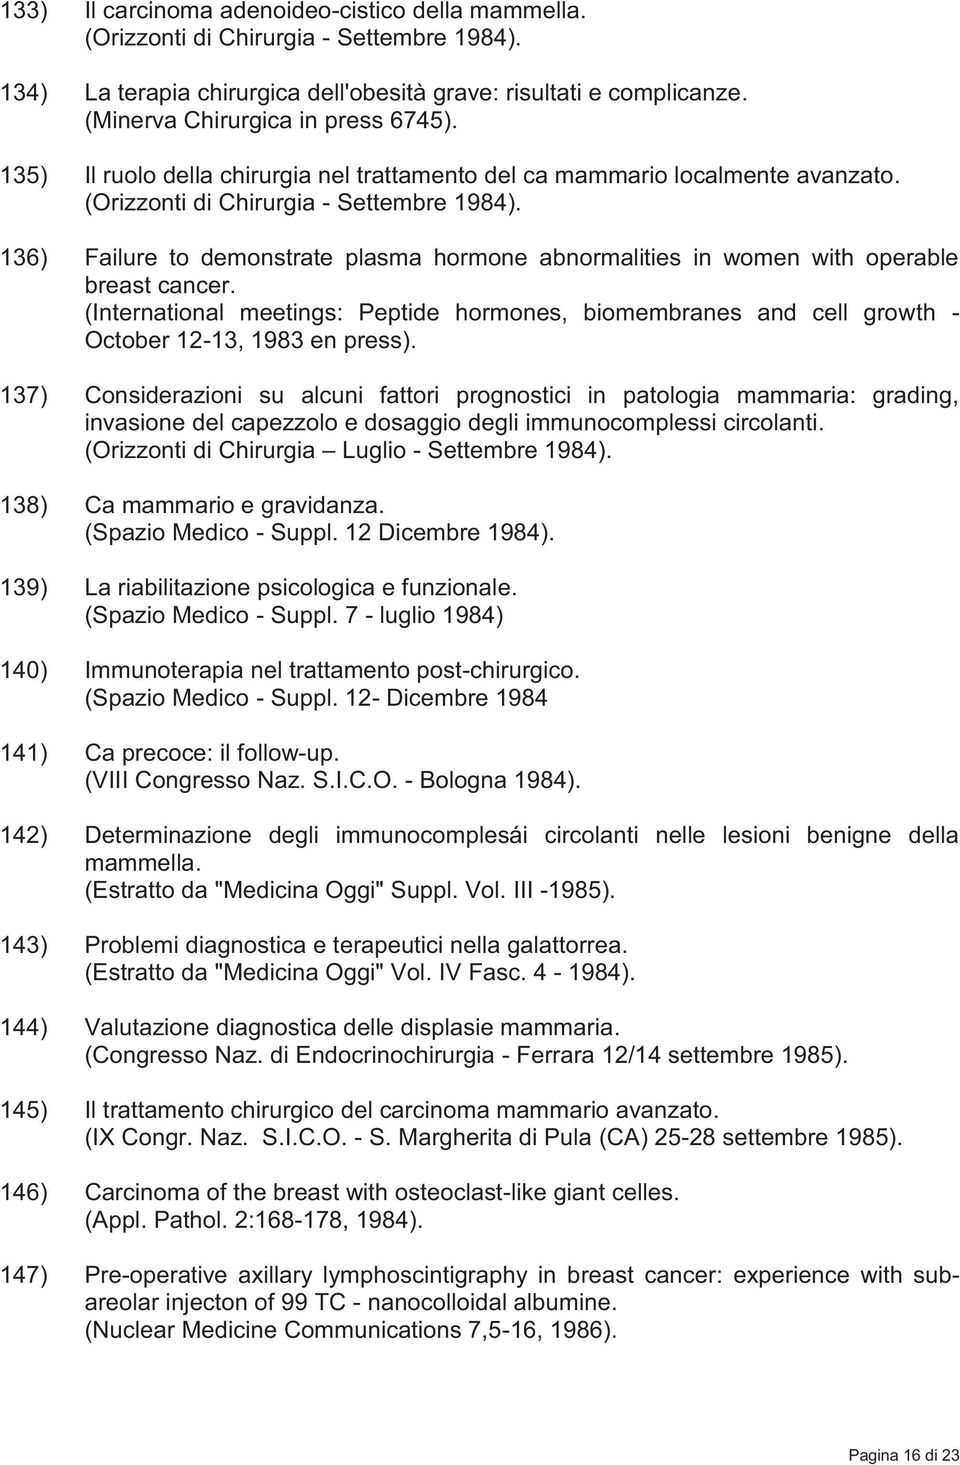 136) Failure to demonstrate plasma hormone abnormalities in women with operable breast cancer. (International meetings: Peptide hormones, biomembranes and cell growth - October 12-13, 1983 en press).